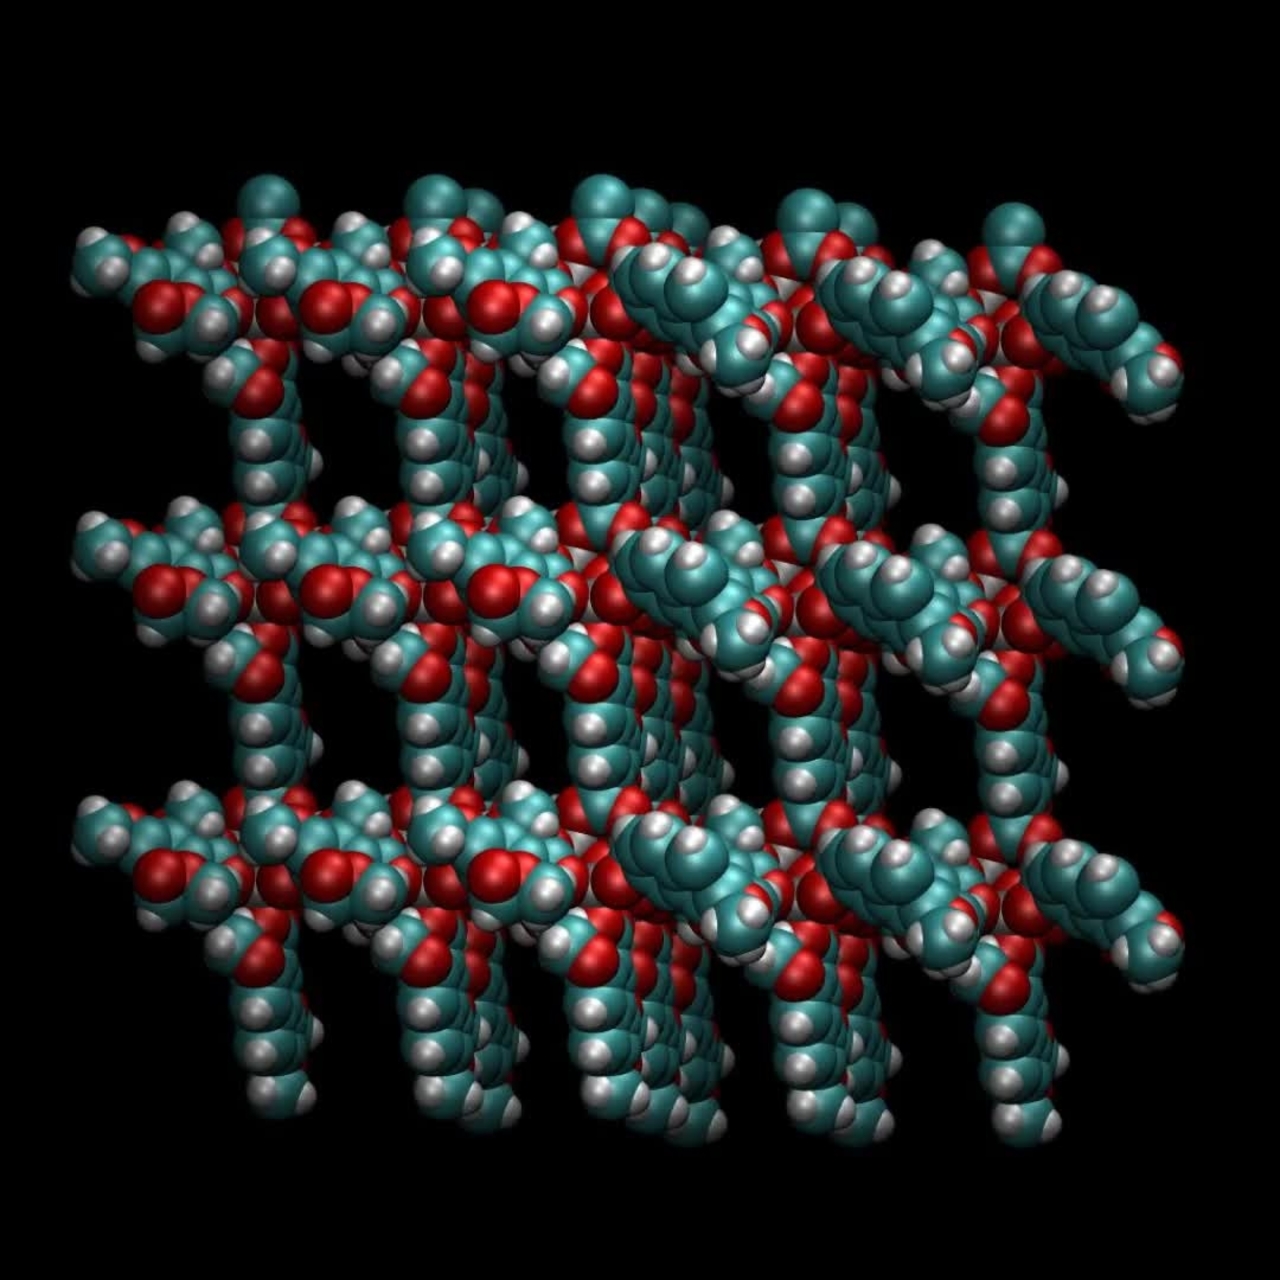 A Hypothetical Porous Crystalline Structure